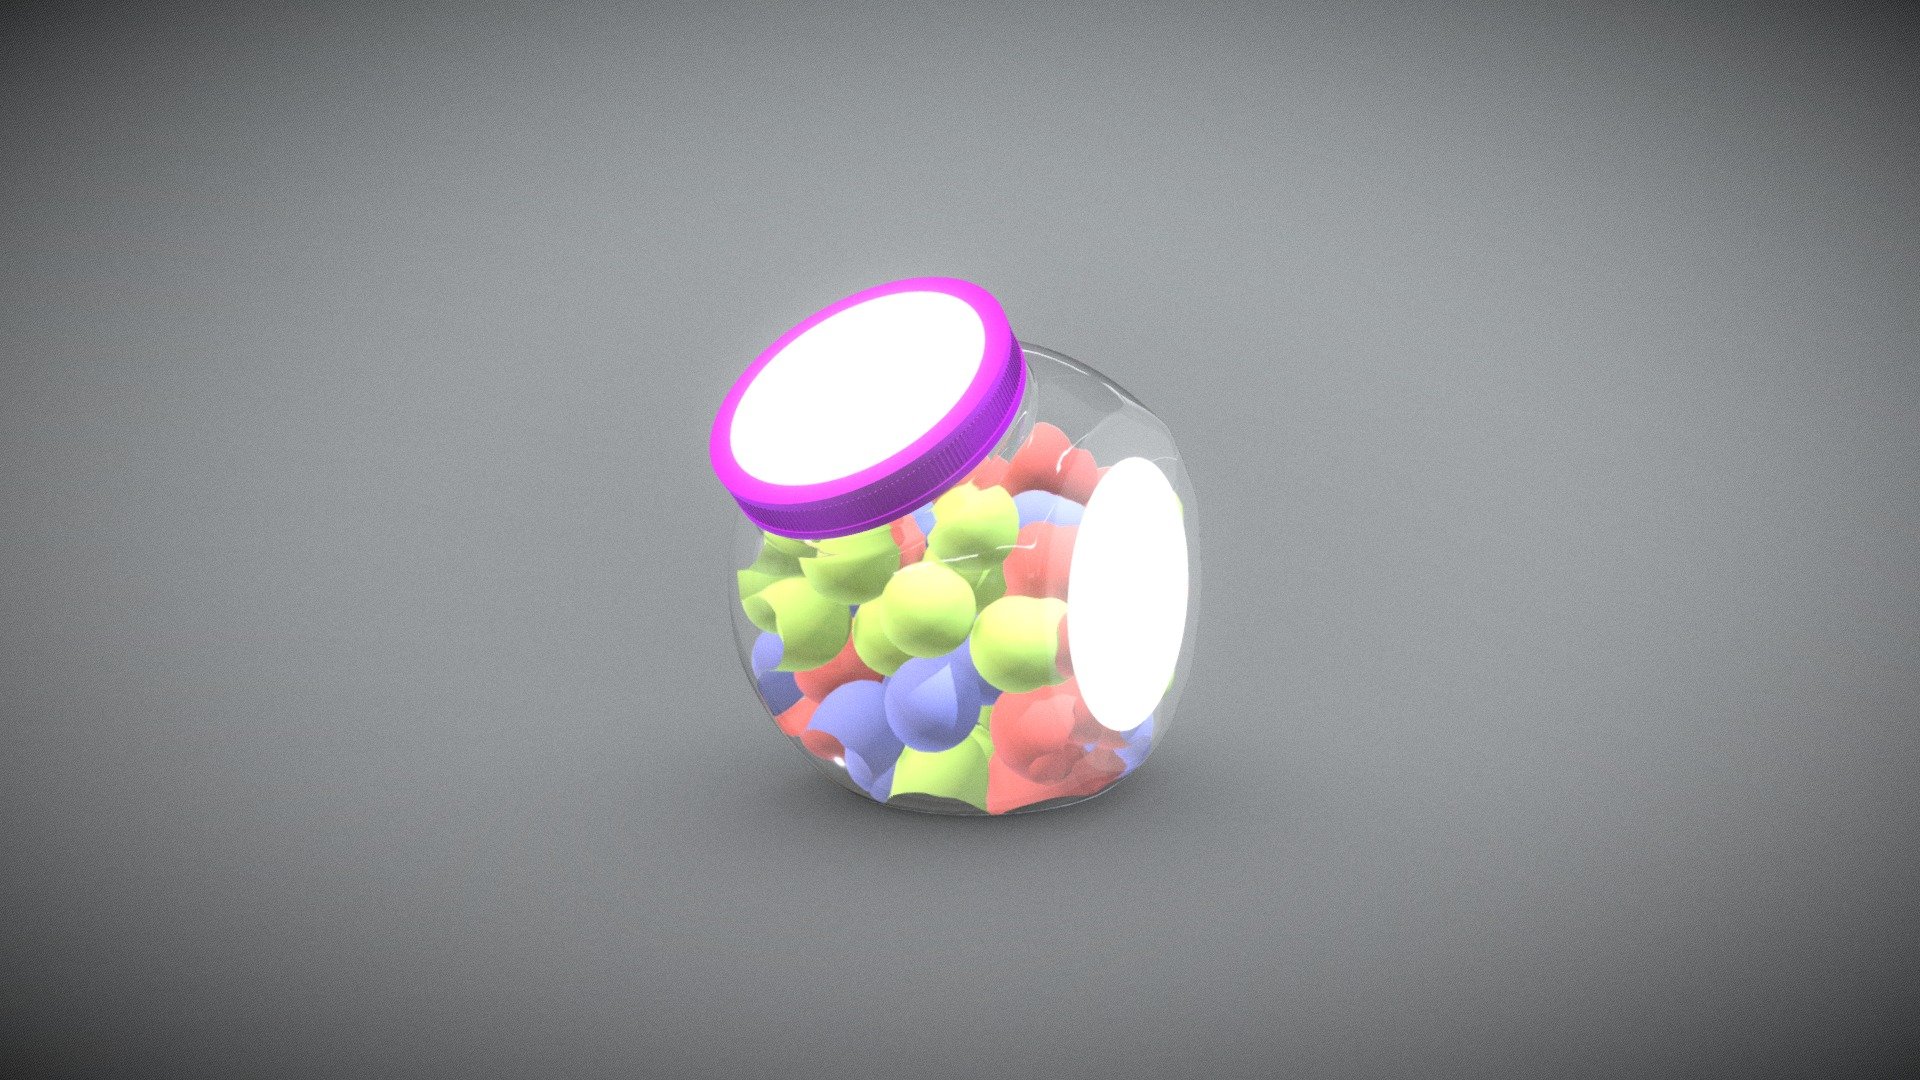 Candy Bowl with screw cap, thread and candies - Candy Bowl - 3D model by adnielsosa 3d model